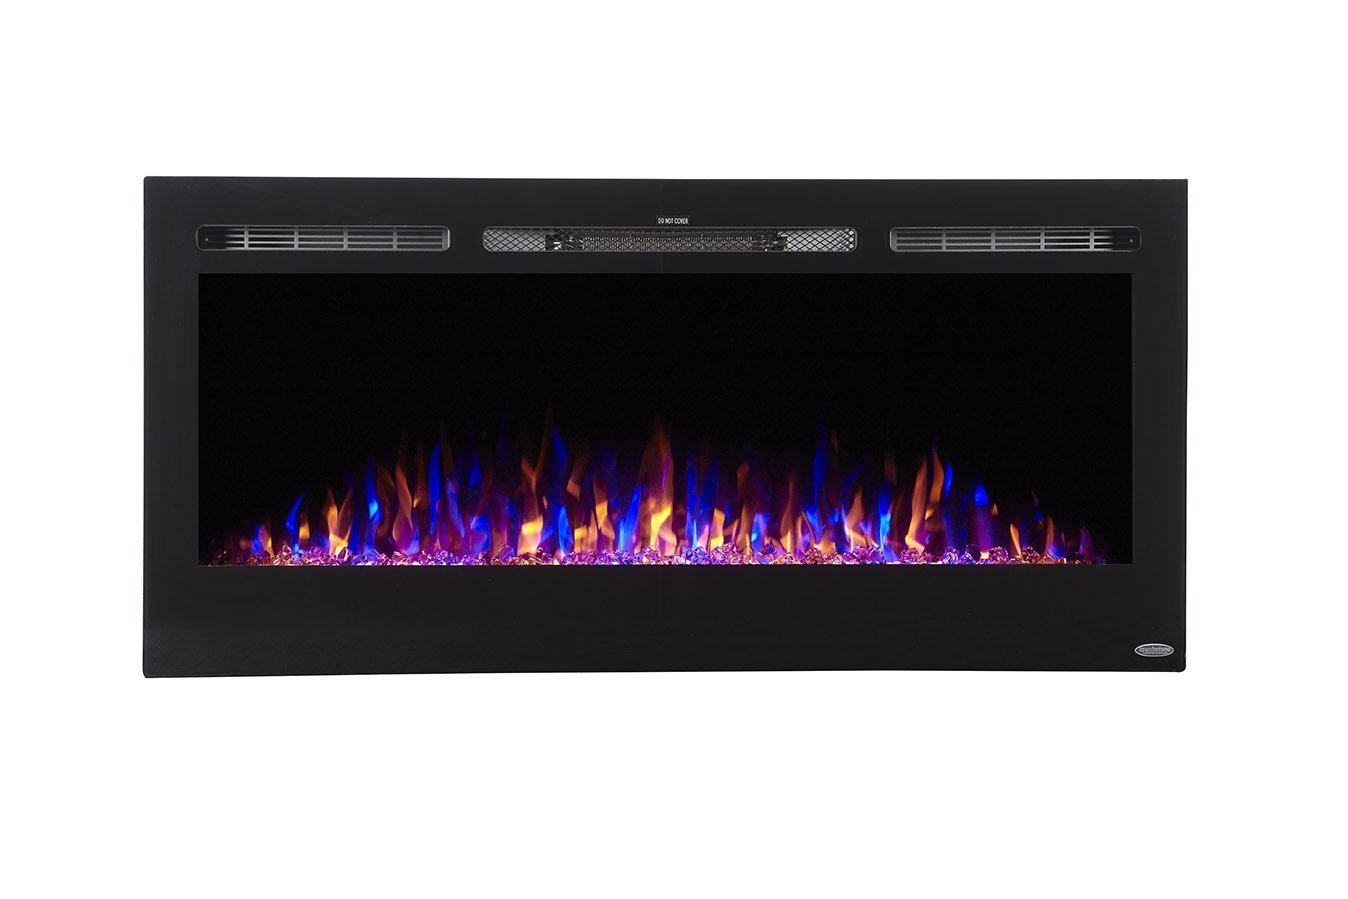 Touchstone Sideline 45 80025 45" Recessed Electric Fireplace